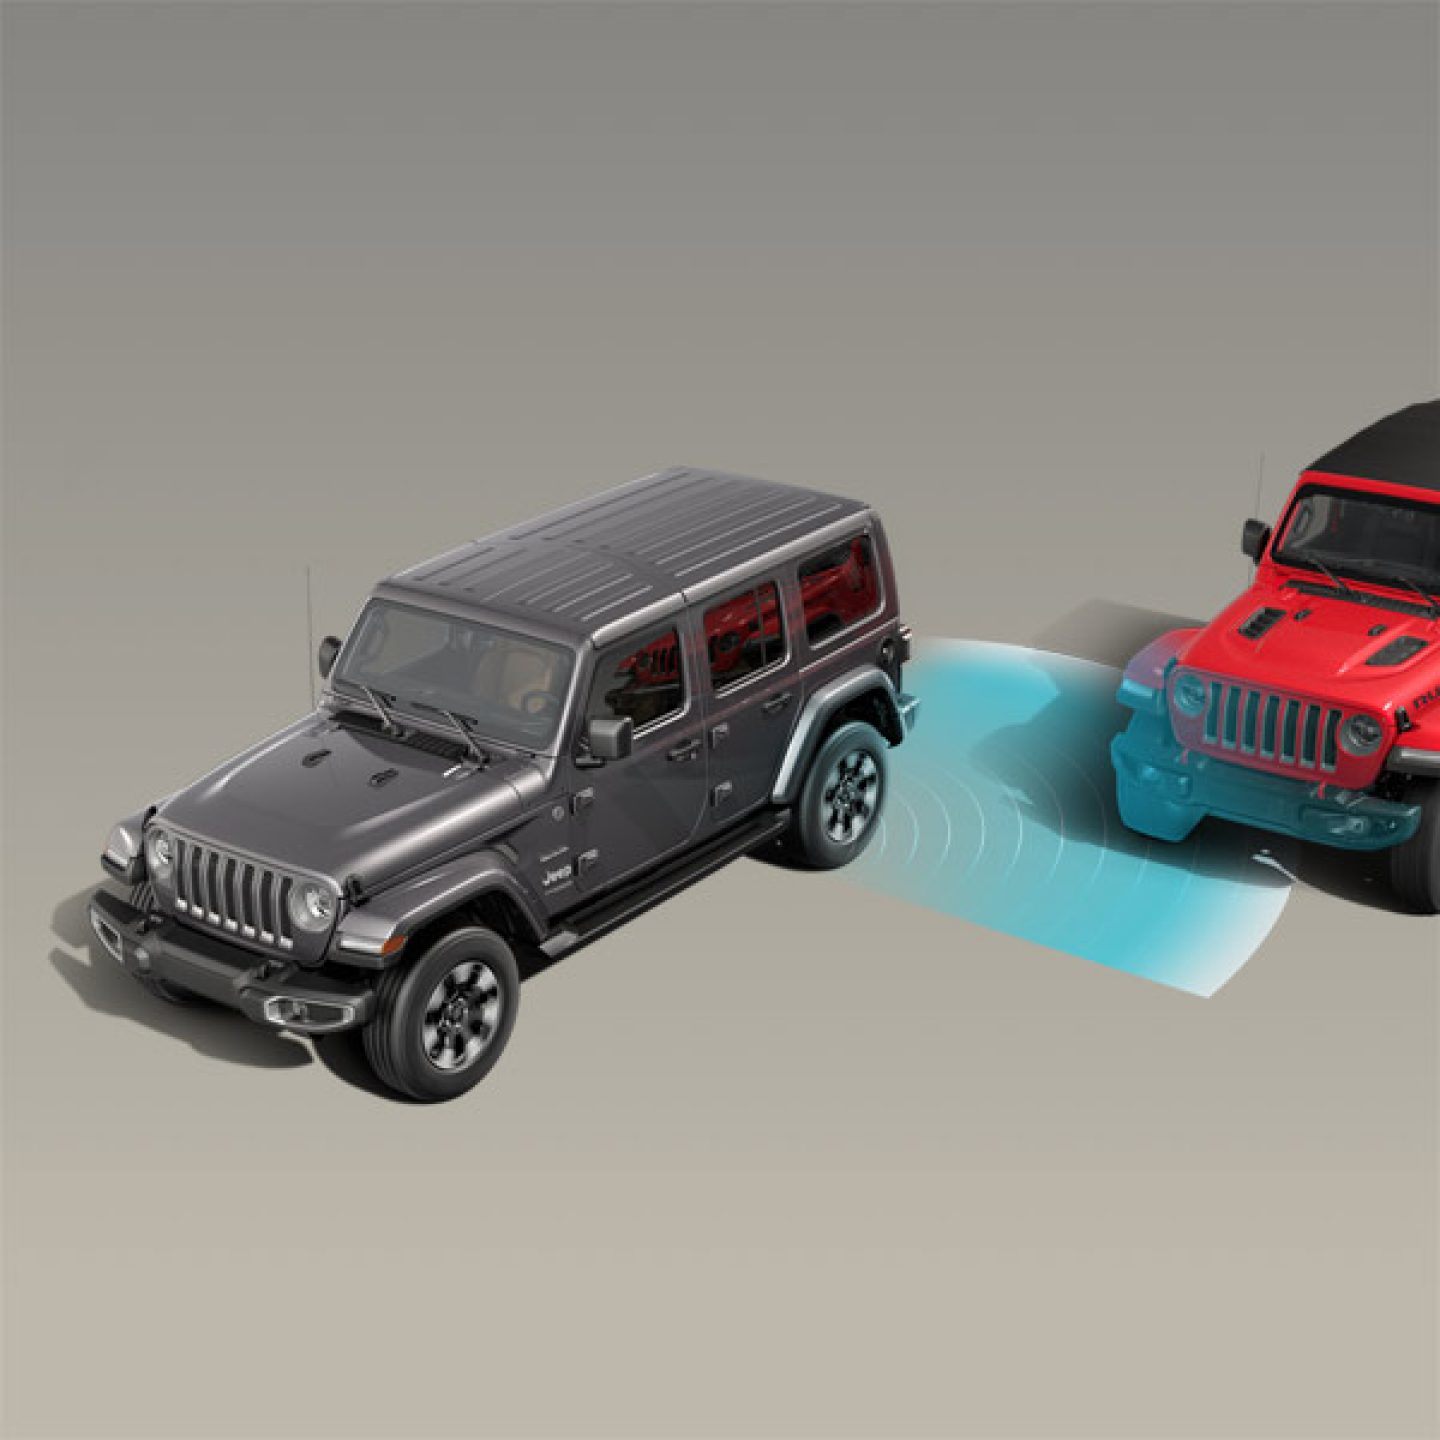 2018-Jeep-Wrangler-JL-VLP-Modelizer-Key-Features-Sport-S-Available-Safety.1440 - Military AutoSource